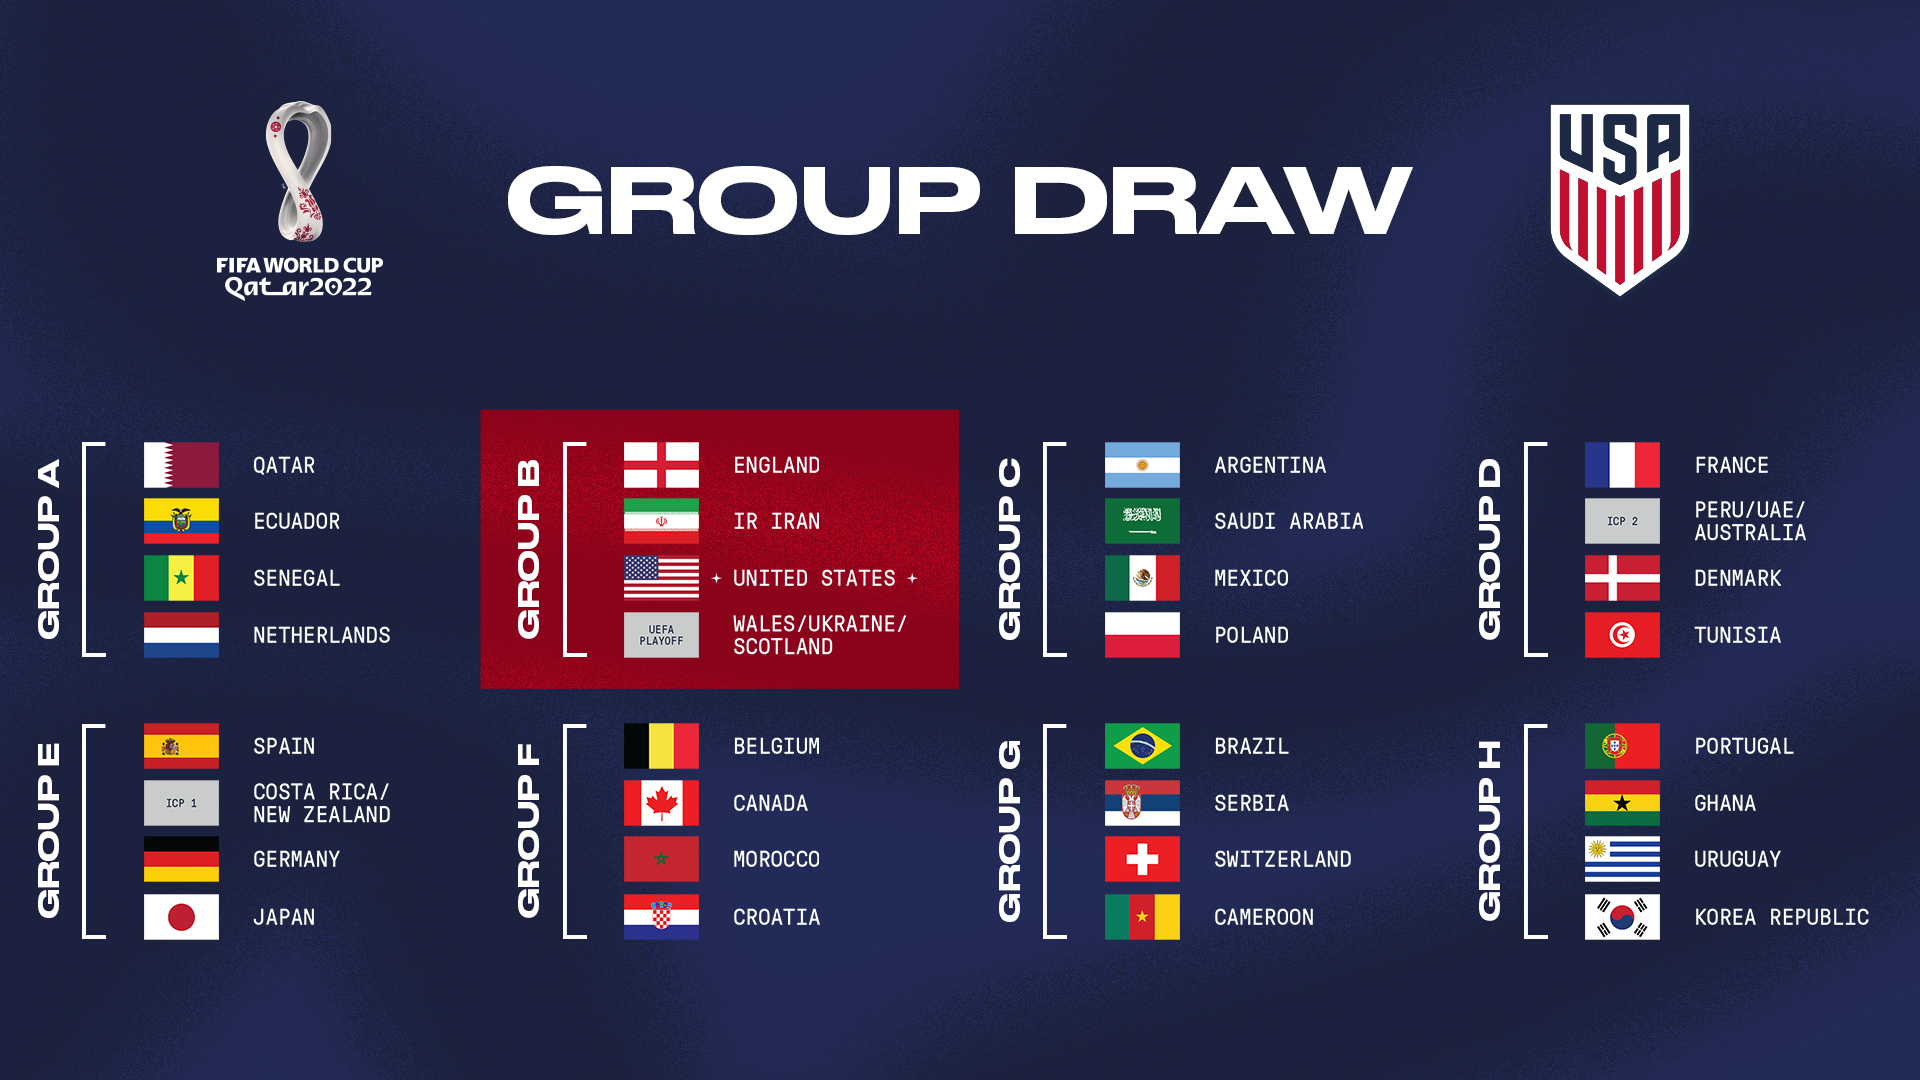 USMNT Draws England, Iran And Either Wales, Scotland Or Ukraine In